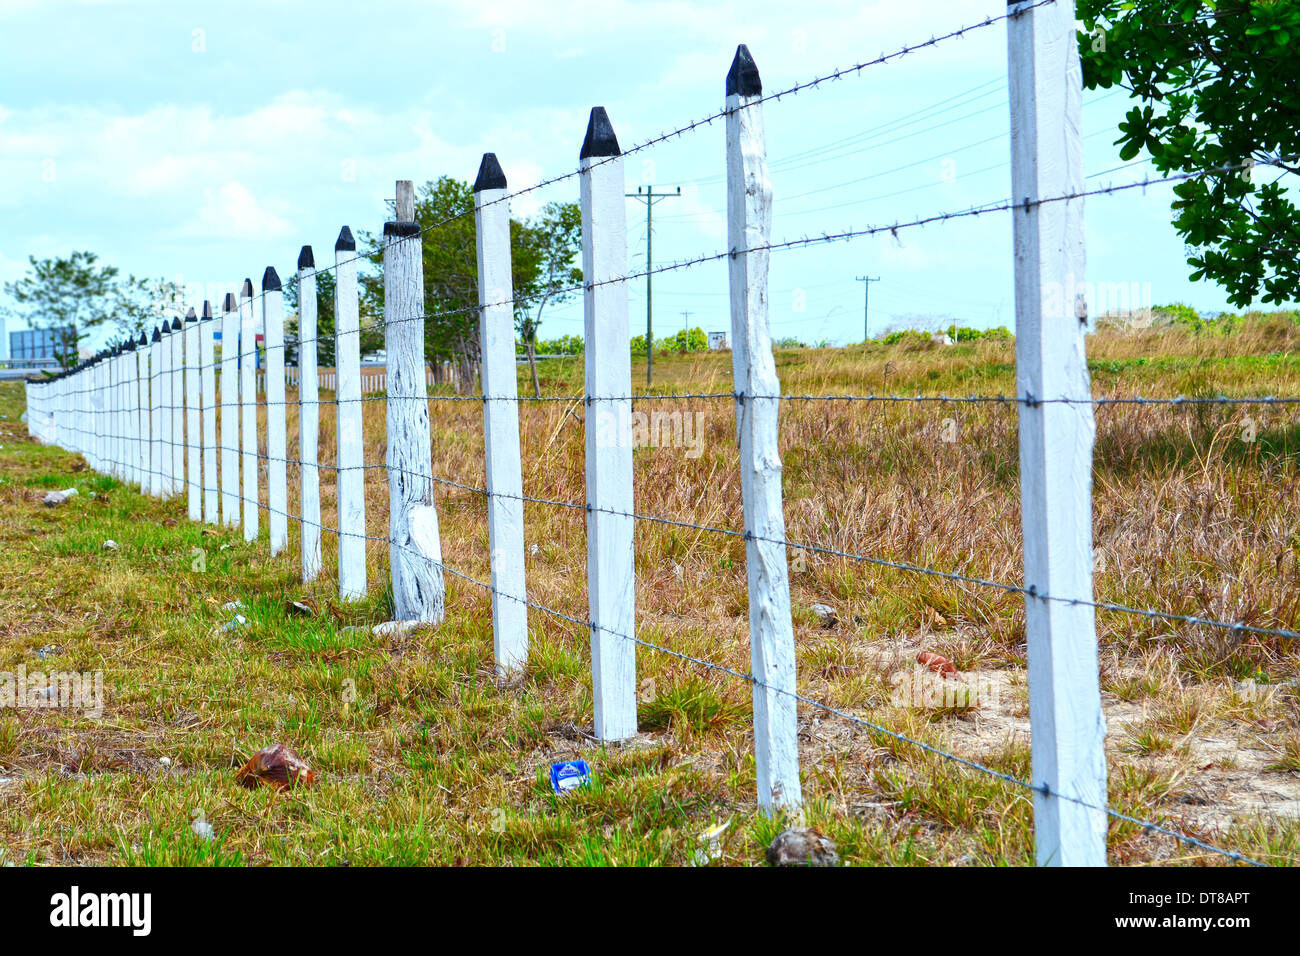 Barbwire fence showing wooden posts all aligned fencing a pasture field Stock Photo